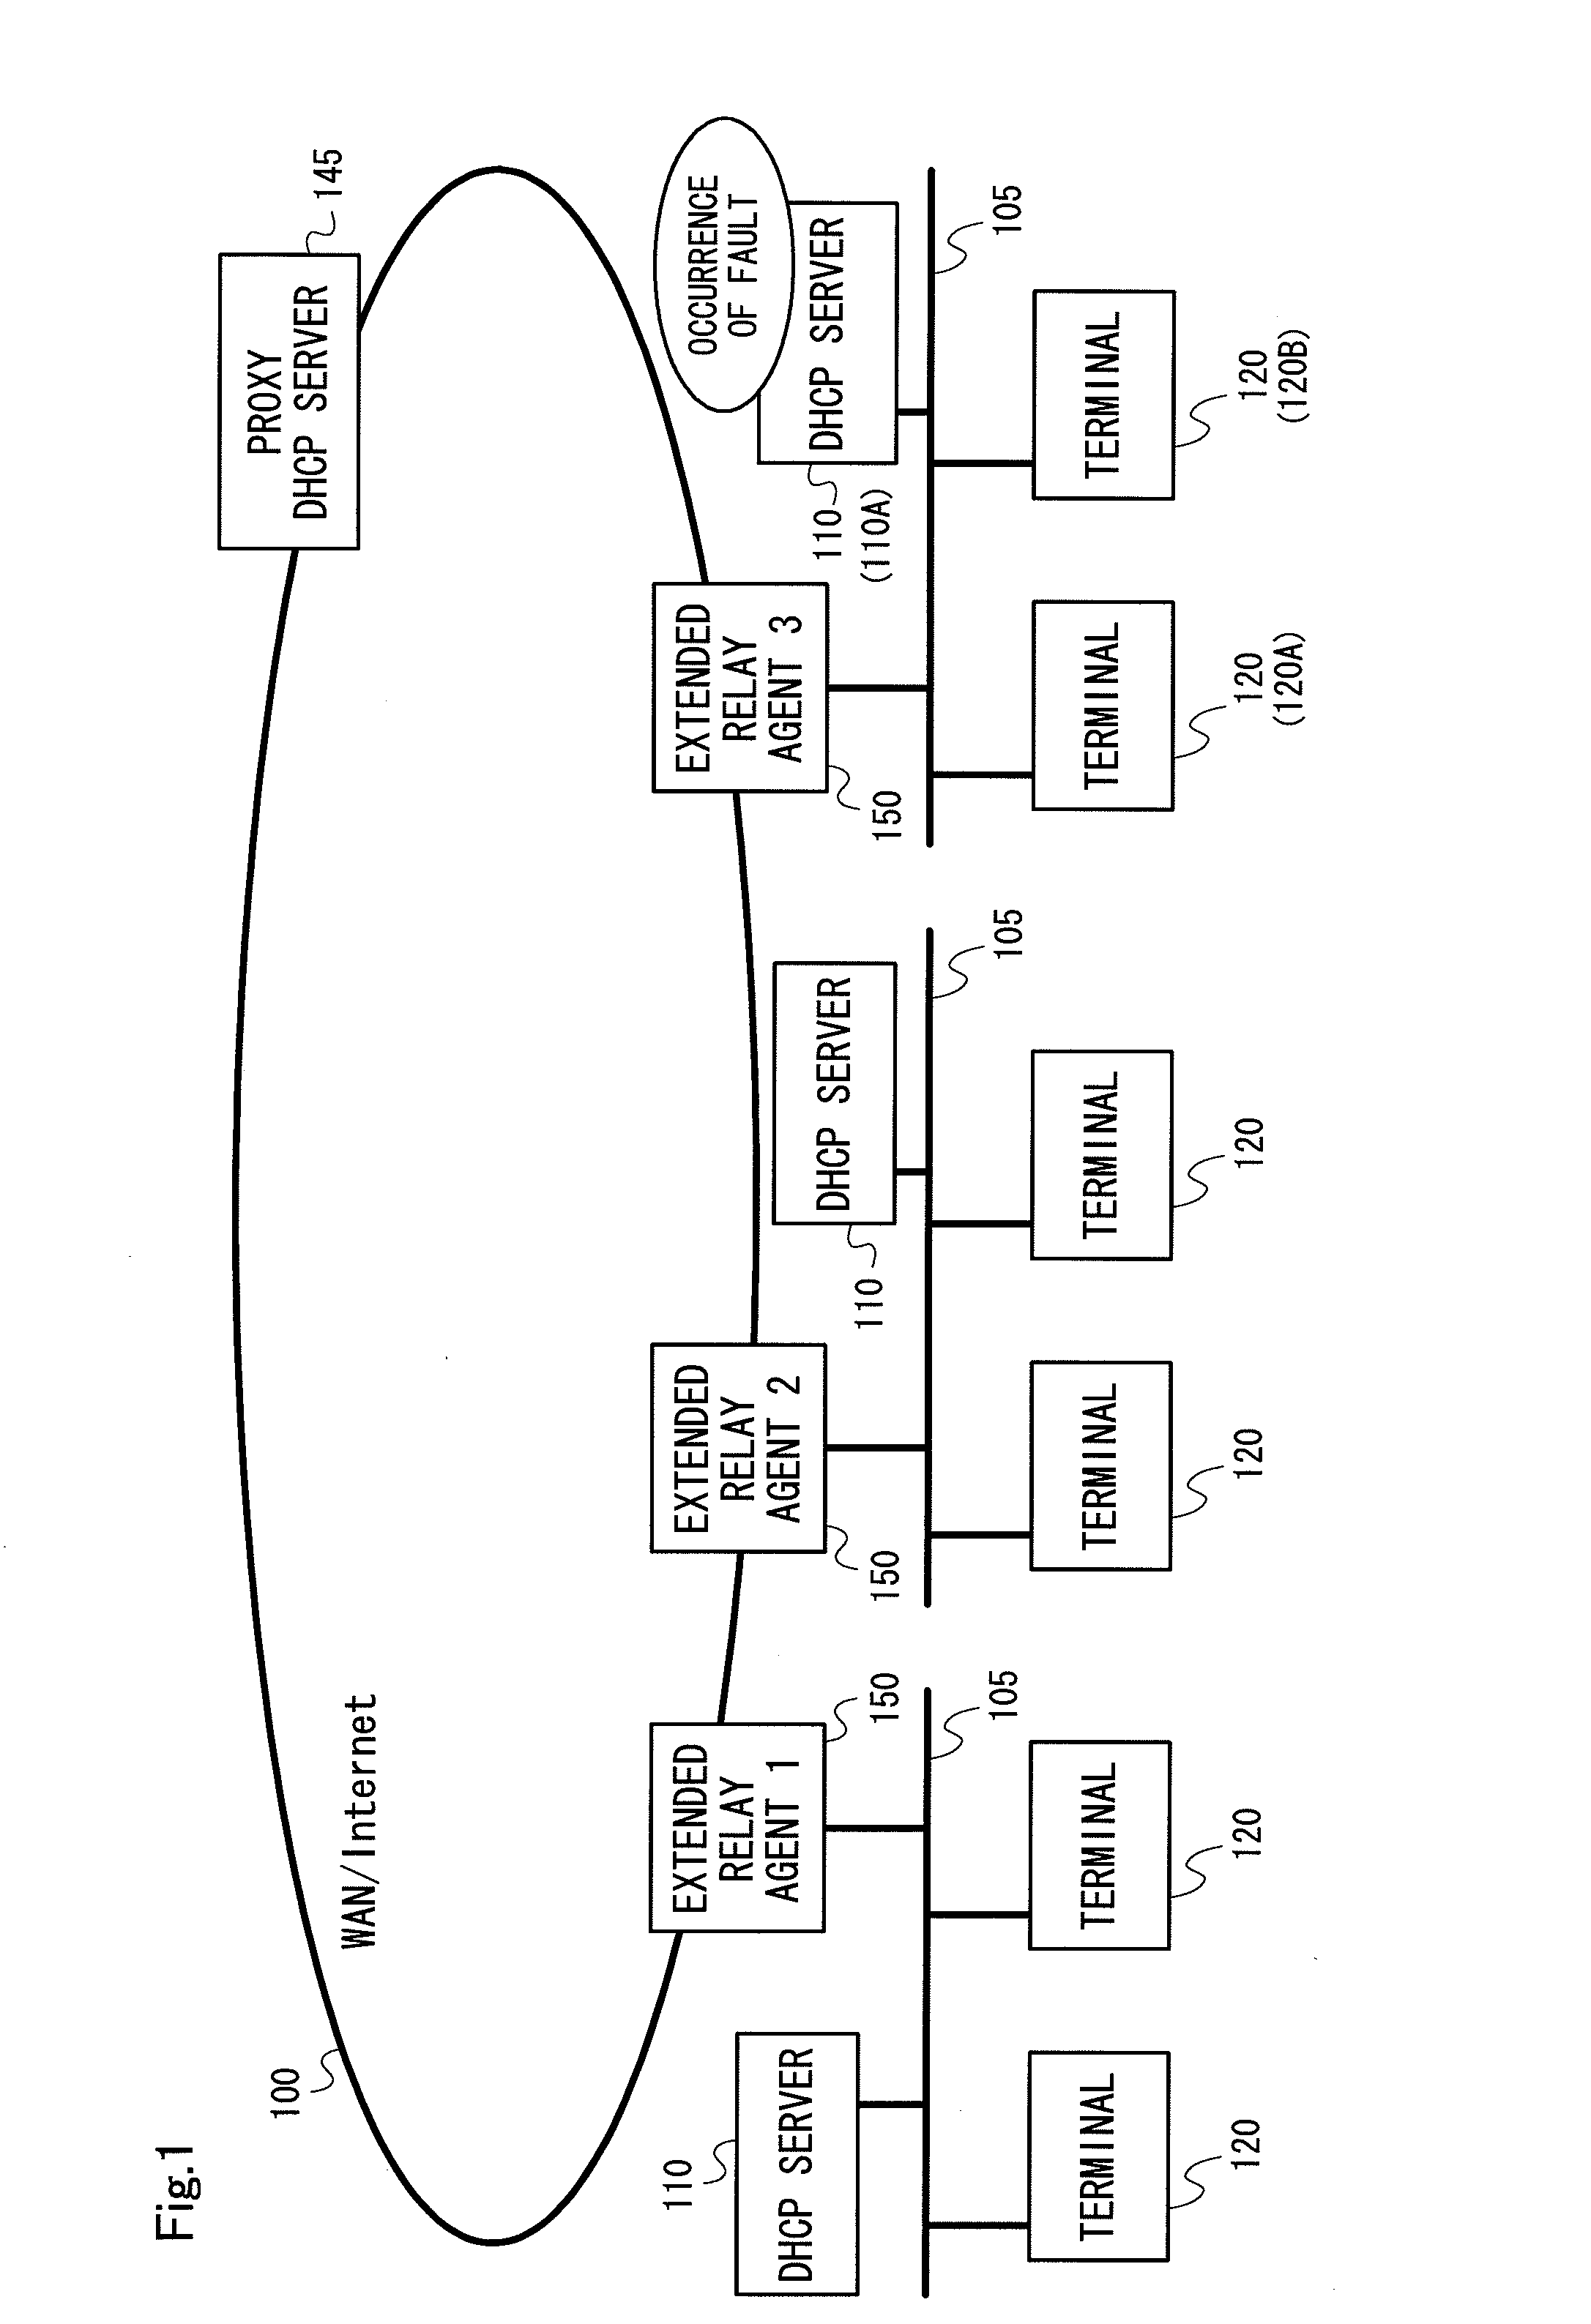 Relay agent device and proxy address leasing device